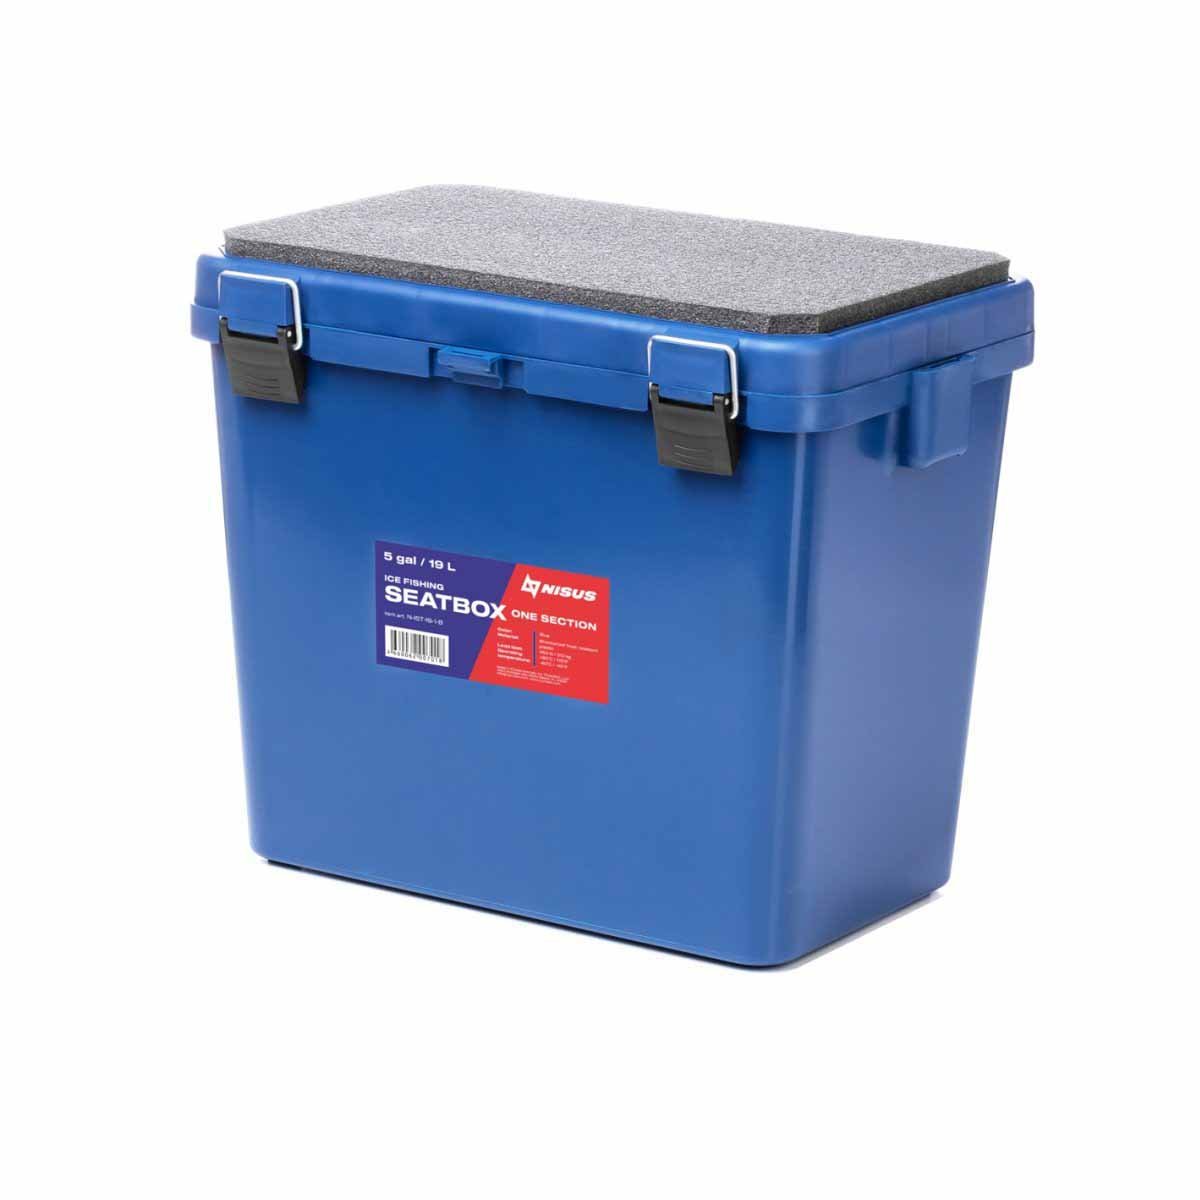 Ice Fishing Bucket Type Box with Seat and Adjustable Shoulder Strap could be used as a place to sit on while ice fishing